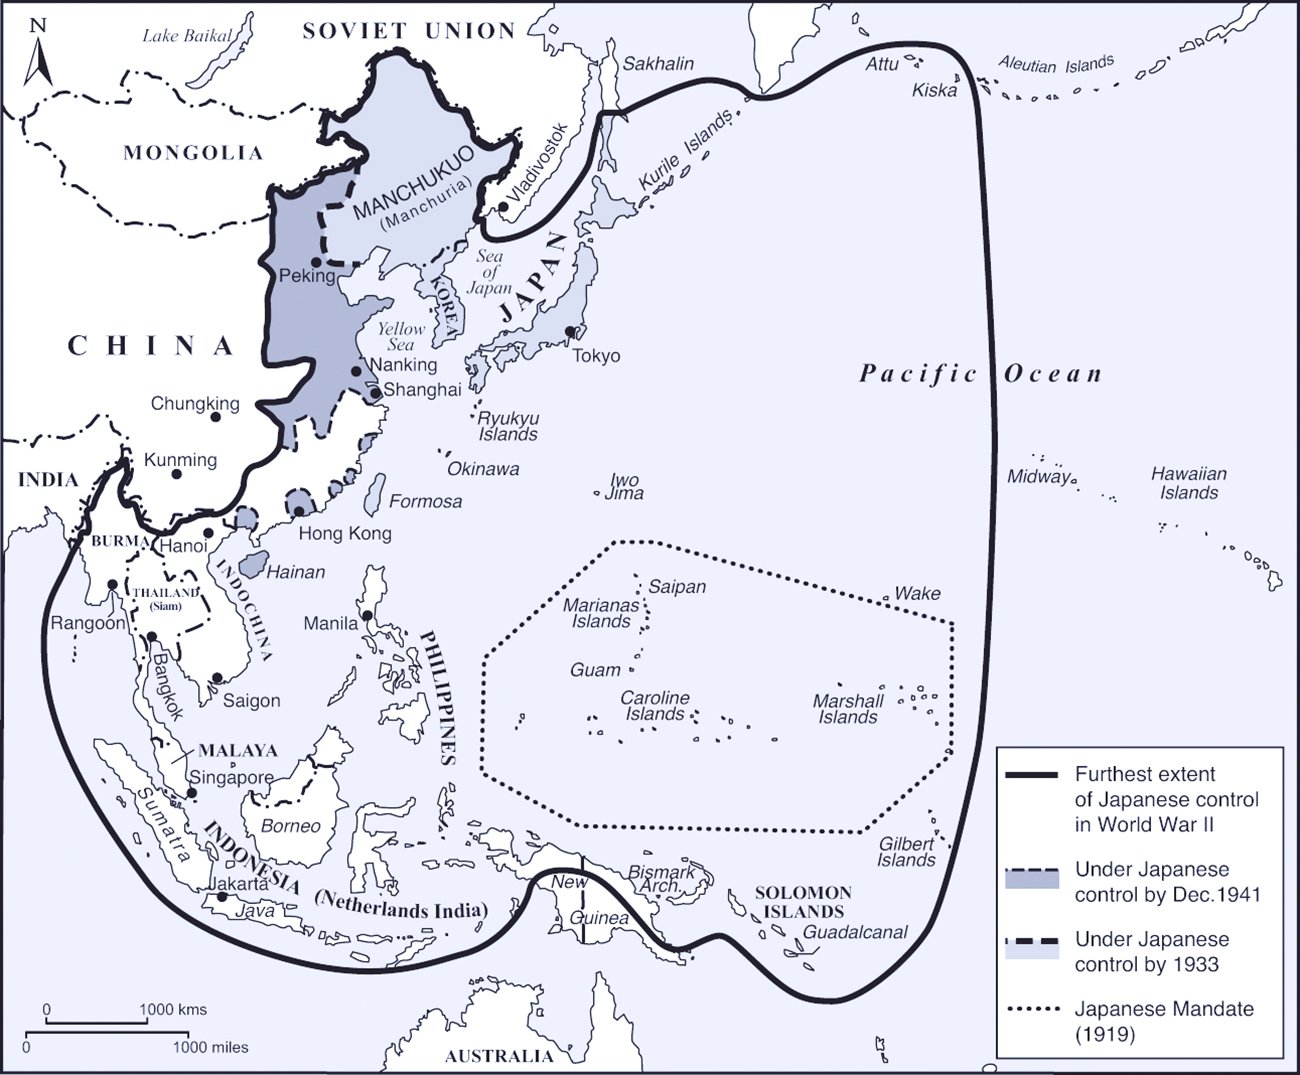 Map showing Japan’s territorial control before and during World War II, with areas marked for the furthest extent of control during the war, territories held by December 1941, regions under control by 1933, and the Japanese Mandate from 1919. Key locations in Asia and the Pacific, including China, the Soviet Union, Southeast Asia, and the Pacific islands, are labeled, with significant cities and bodies of water indicated. The map highlights Japan's expansive reach across the Pacific Ocean.